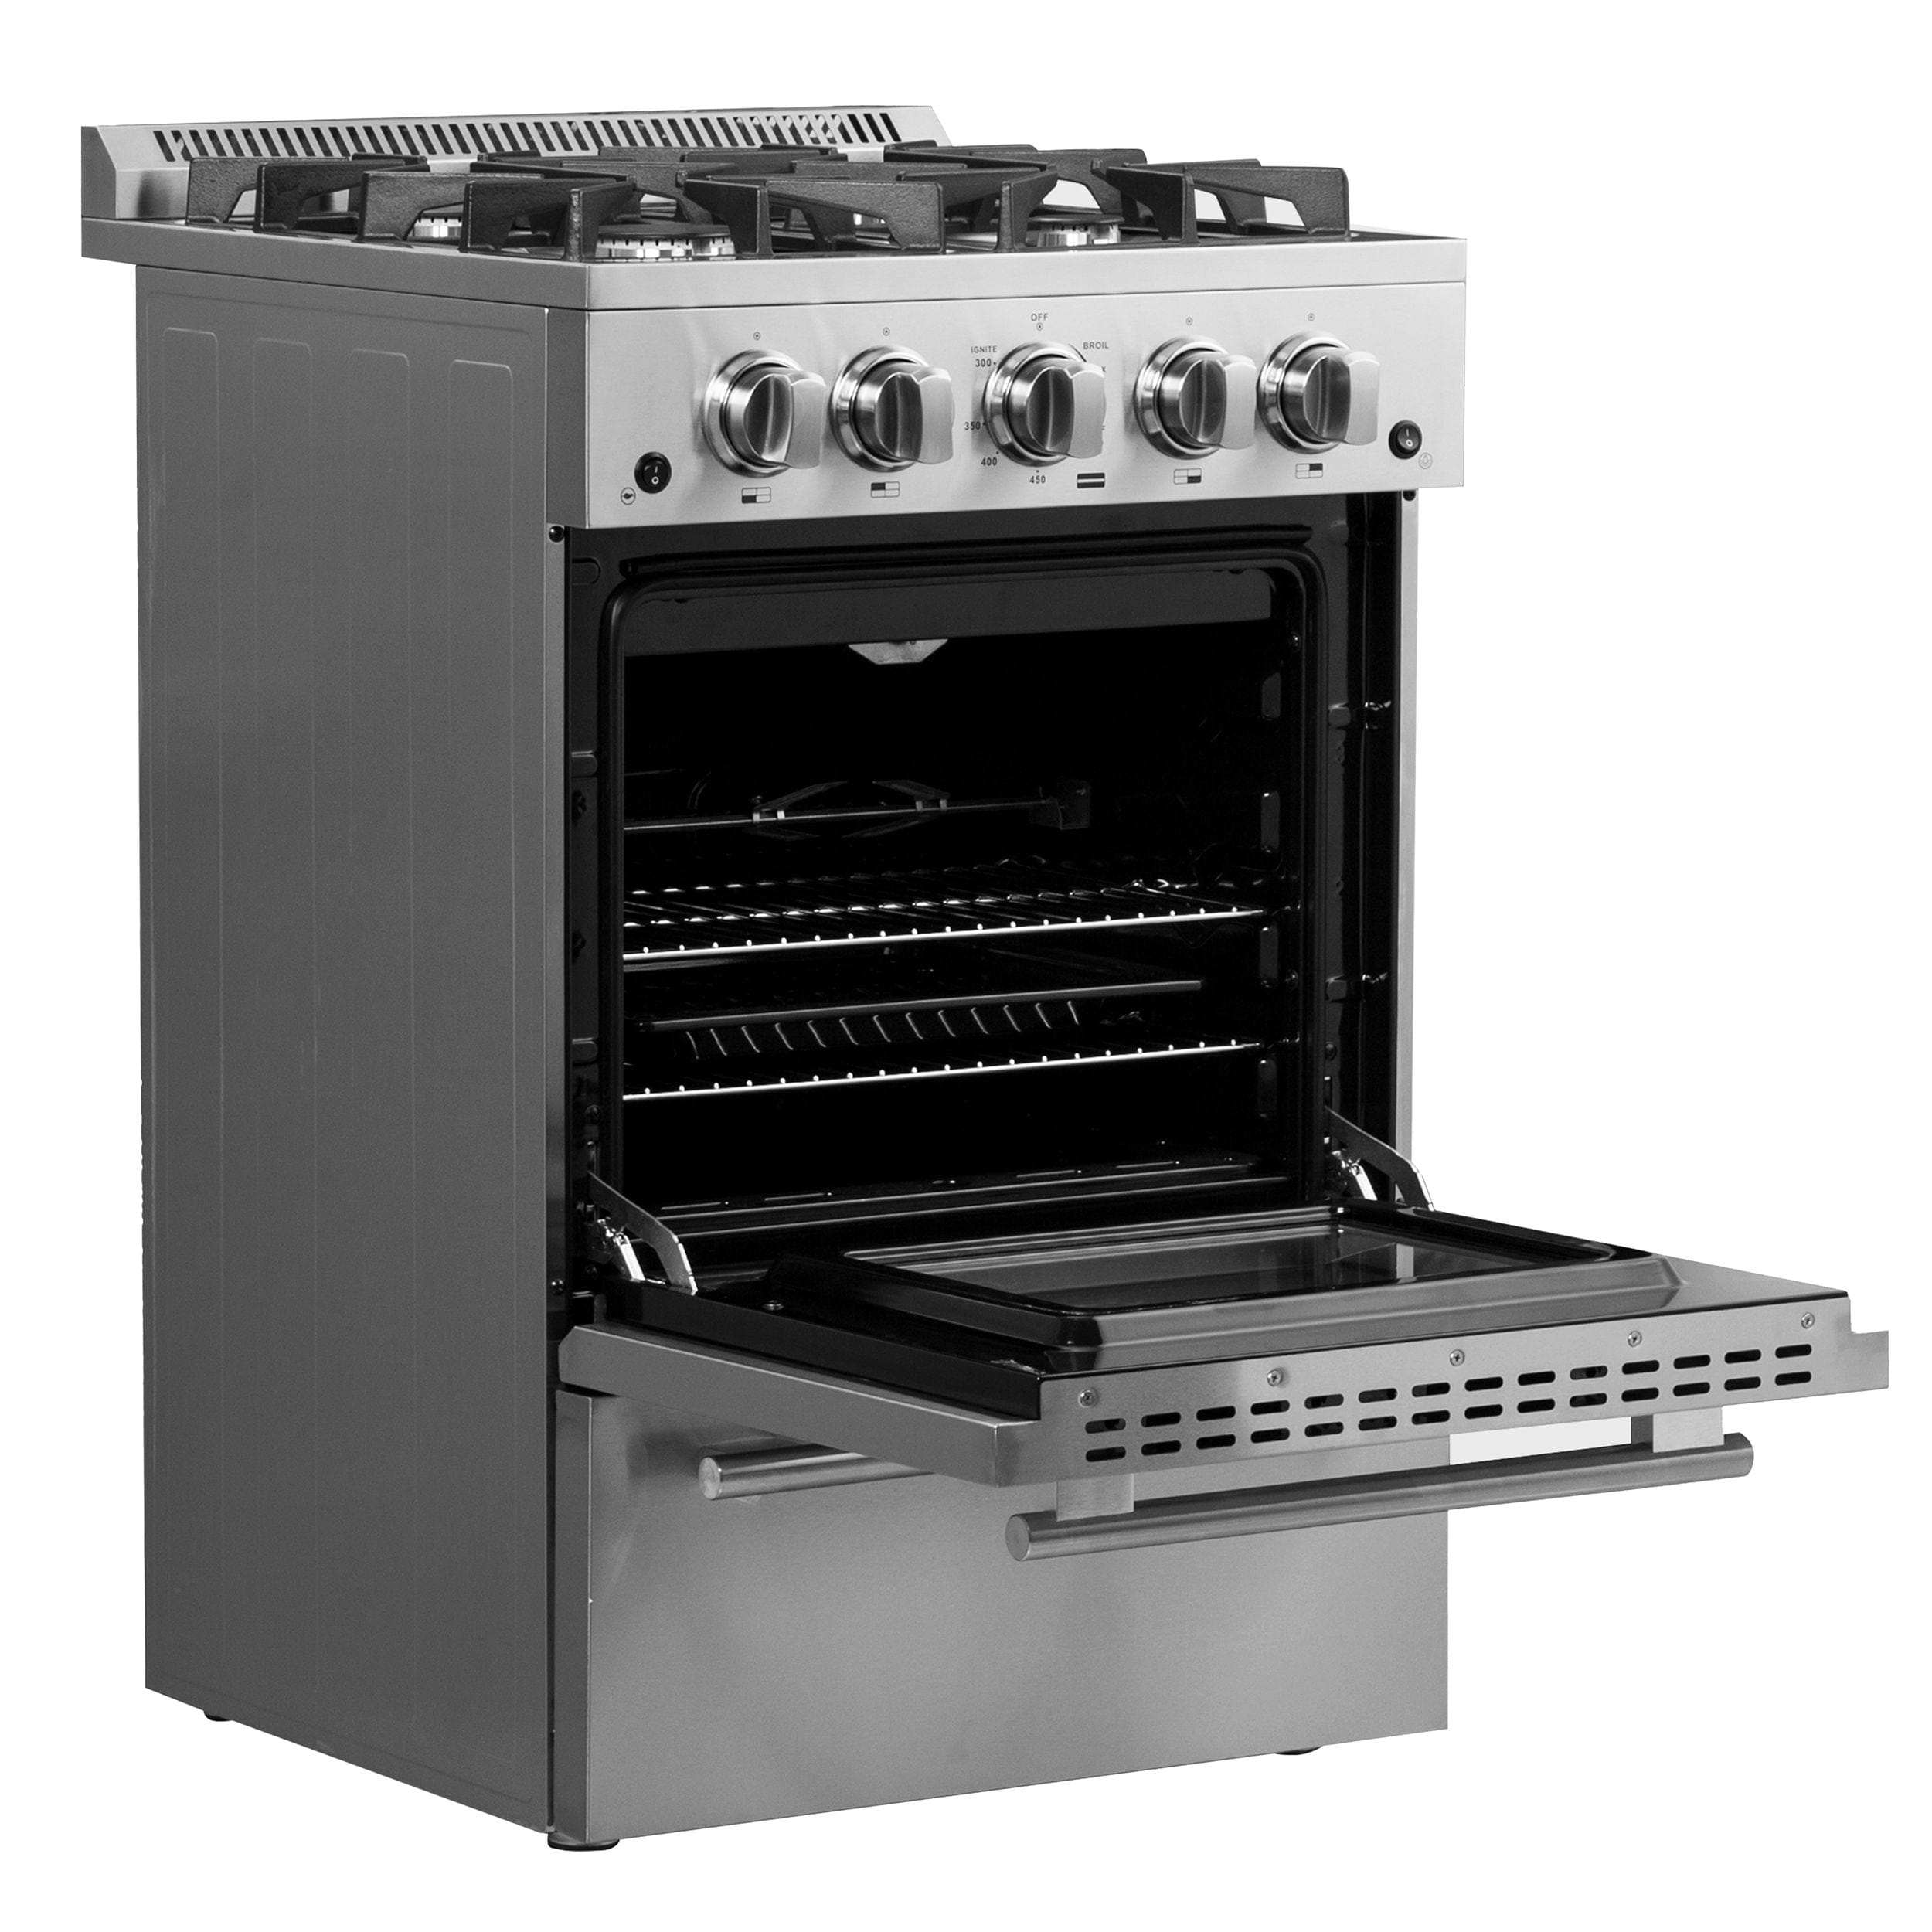 Forno Breno 24" Freestanding Gas Range With 4 Sealed Burners in Stainless Steel, FFSGS6272-24 Ranges FFSGS6272-24 Luxury Appliances Direct